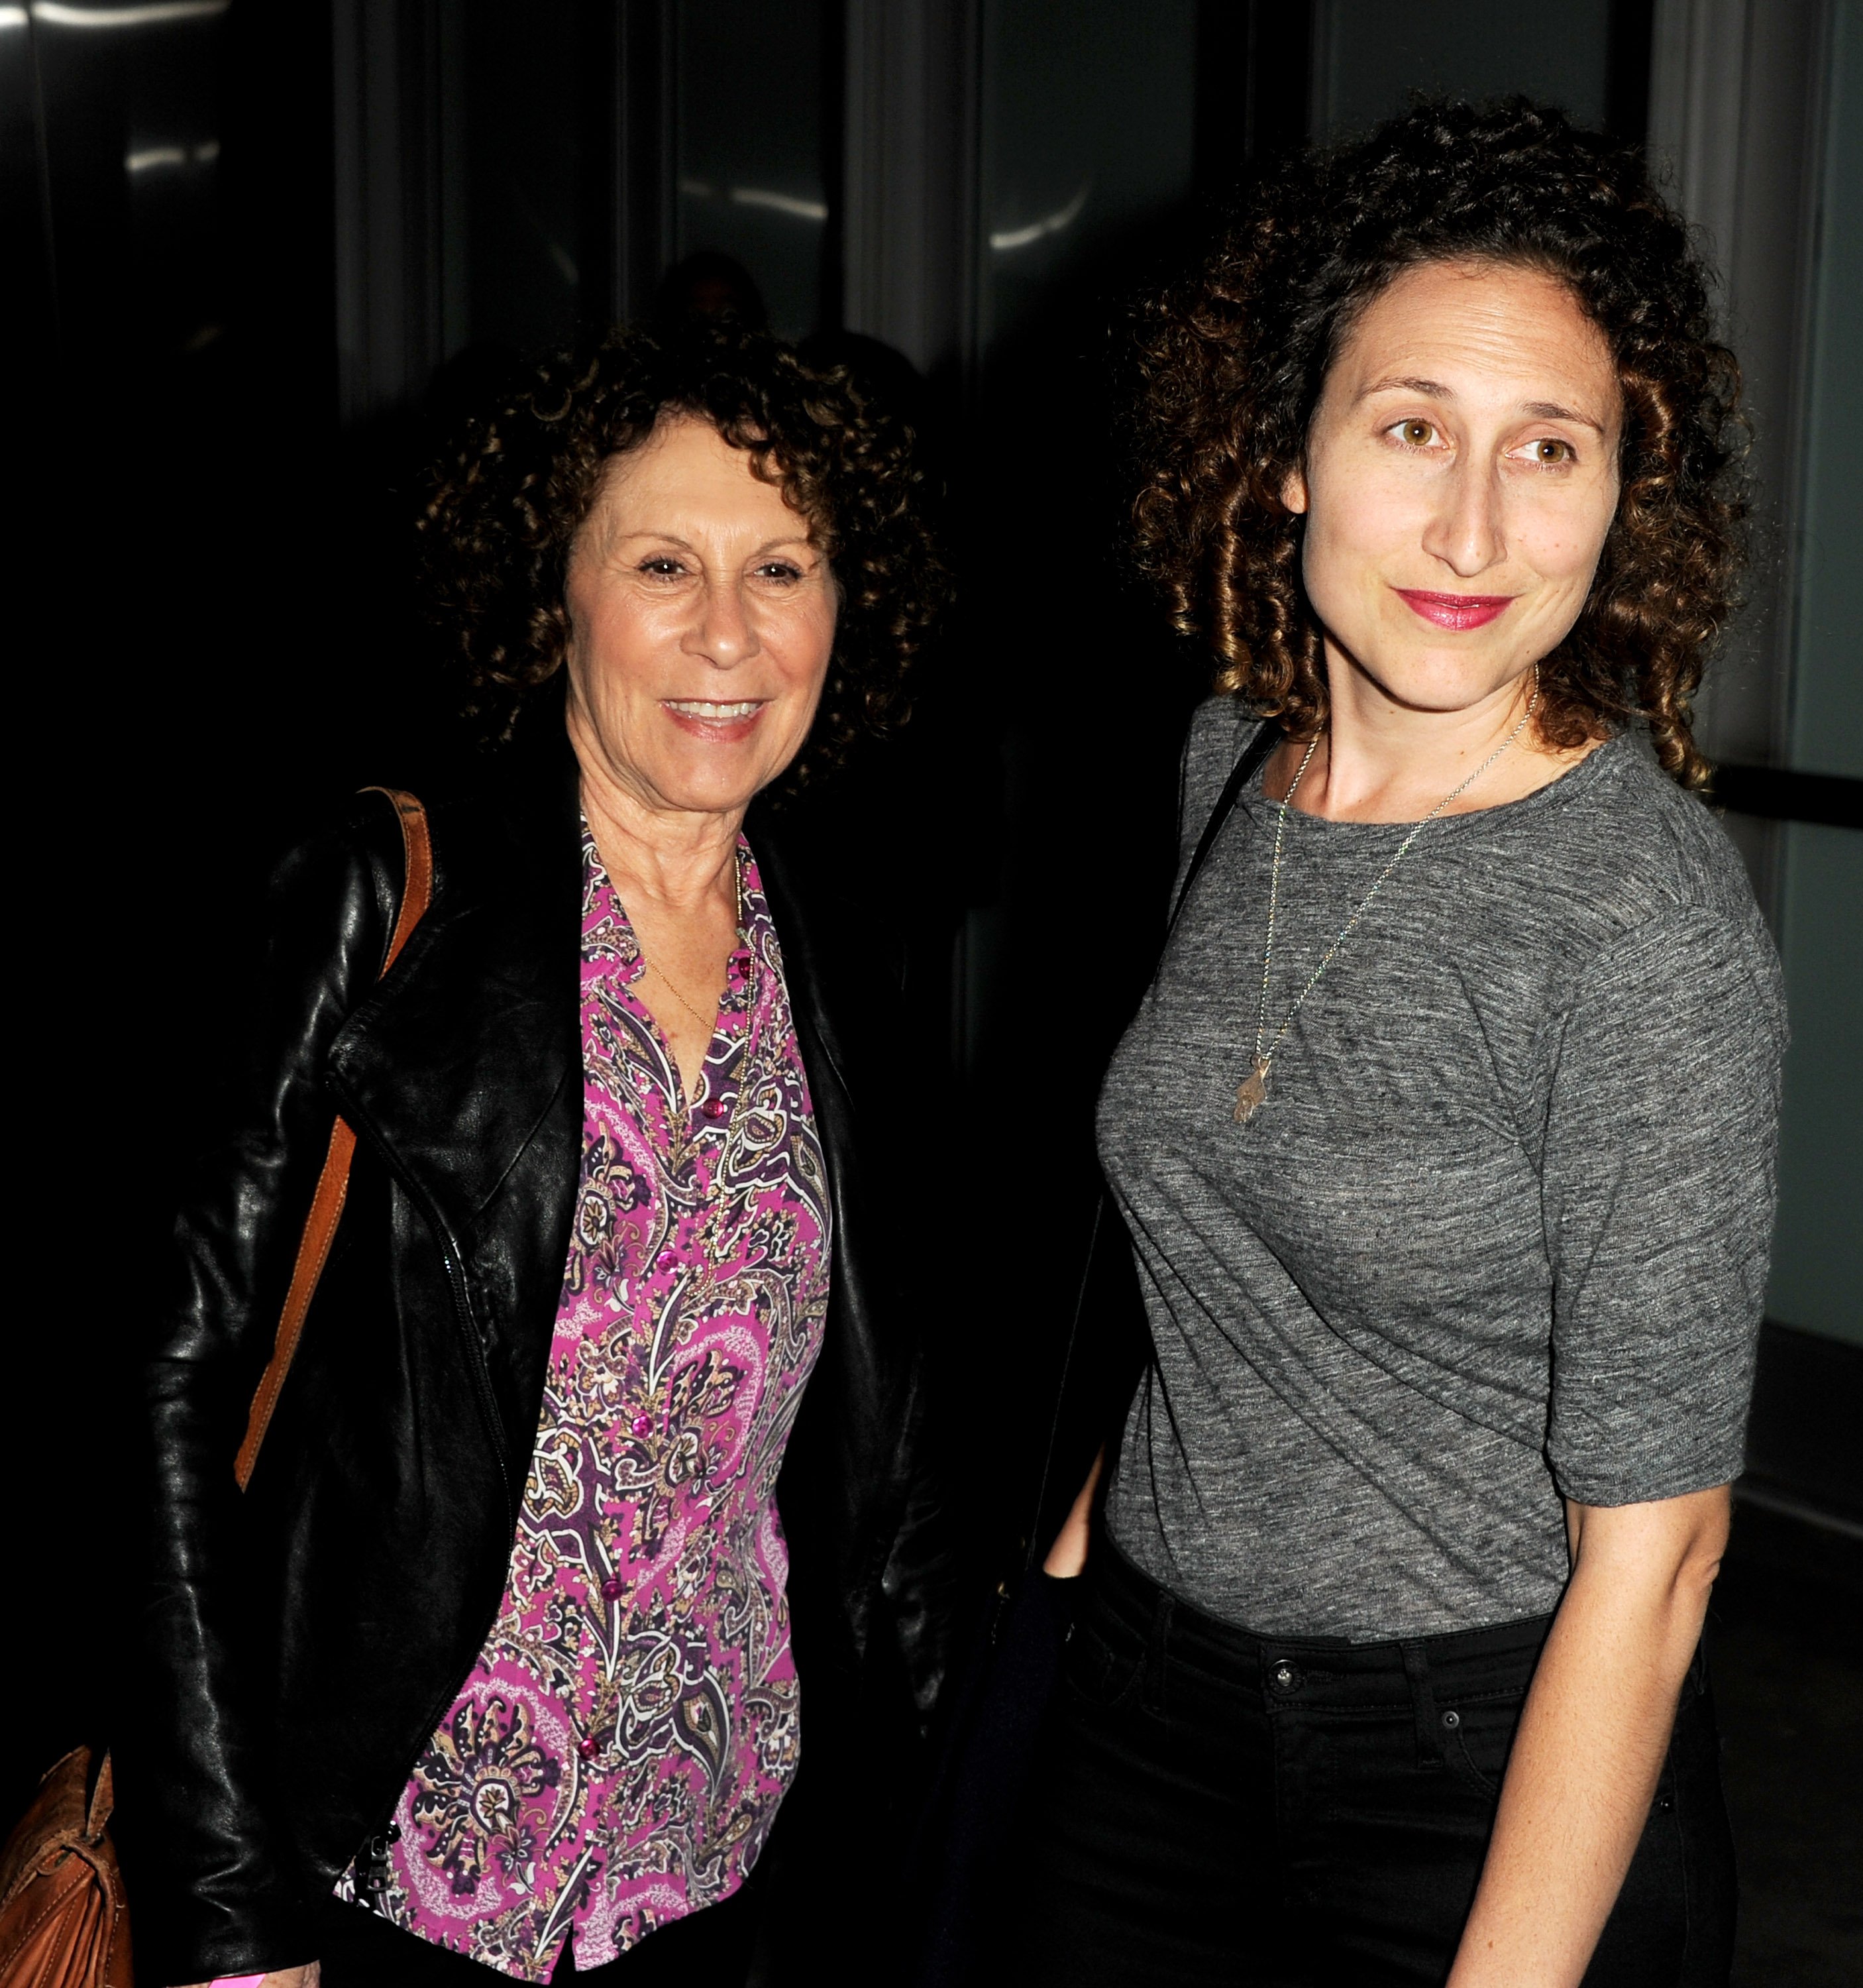 Rhea Perlman (L) and her daughter Grace Fan DeVito arrive at the screening of XLrator Media's "CBGB" at the Arclight Theatre on October 1, 2013, in Los Angeles, California. | Source: Getty Images.